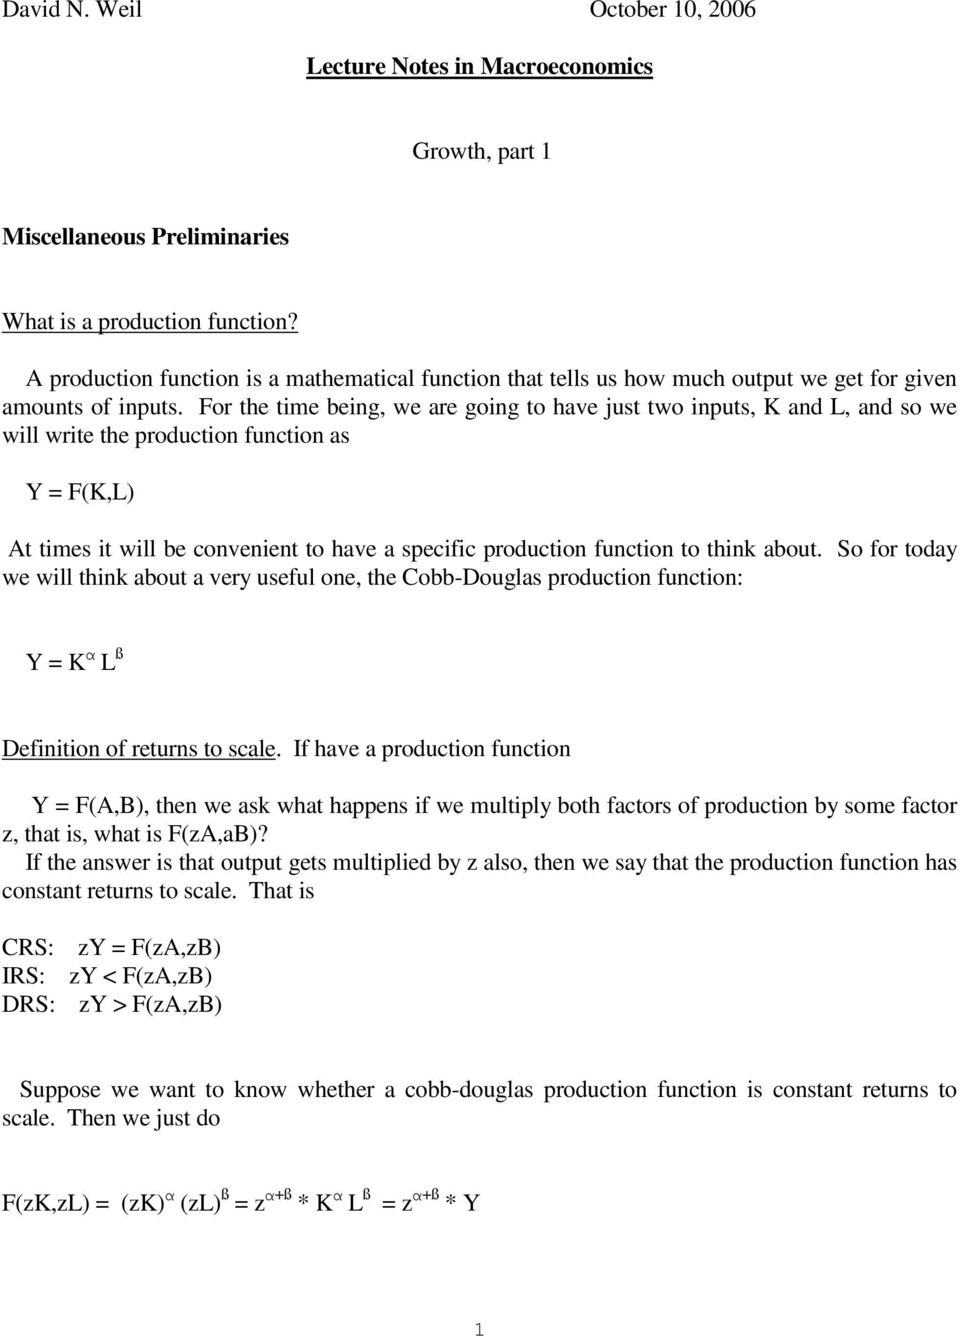 For the time being, we are going to have just two inputs, K and L, and so we will write the production function as Y = F(K,L) At times it will be convenient to have a specific production function to